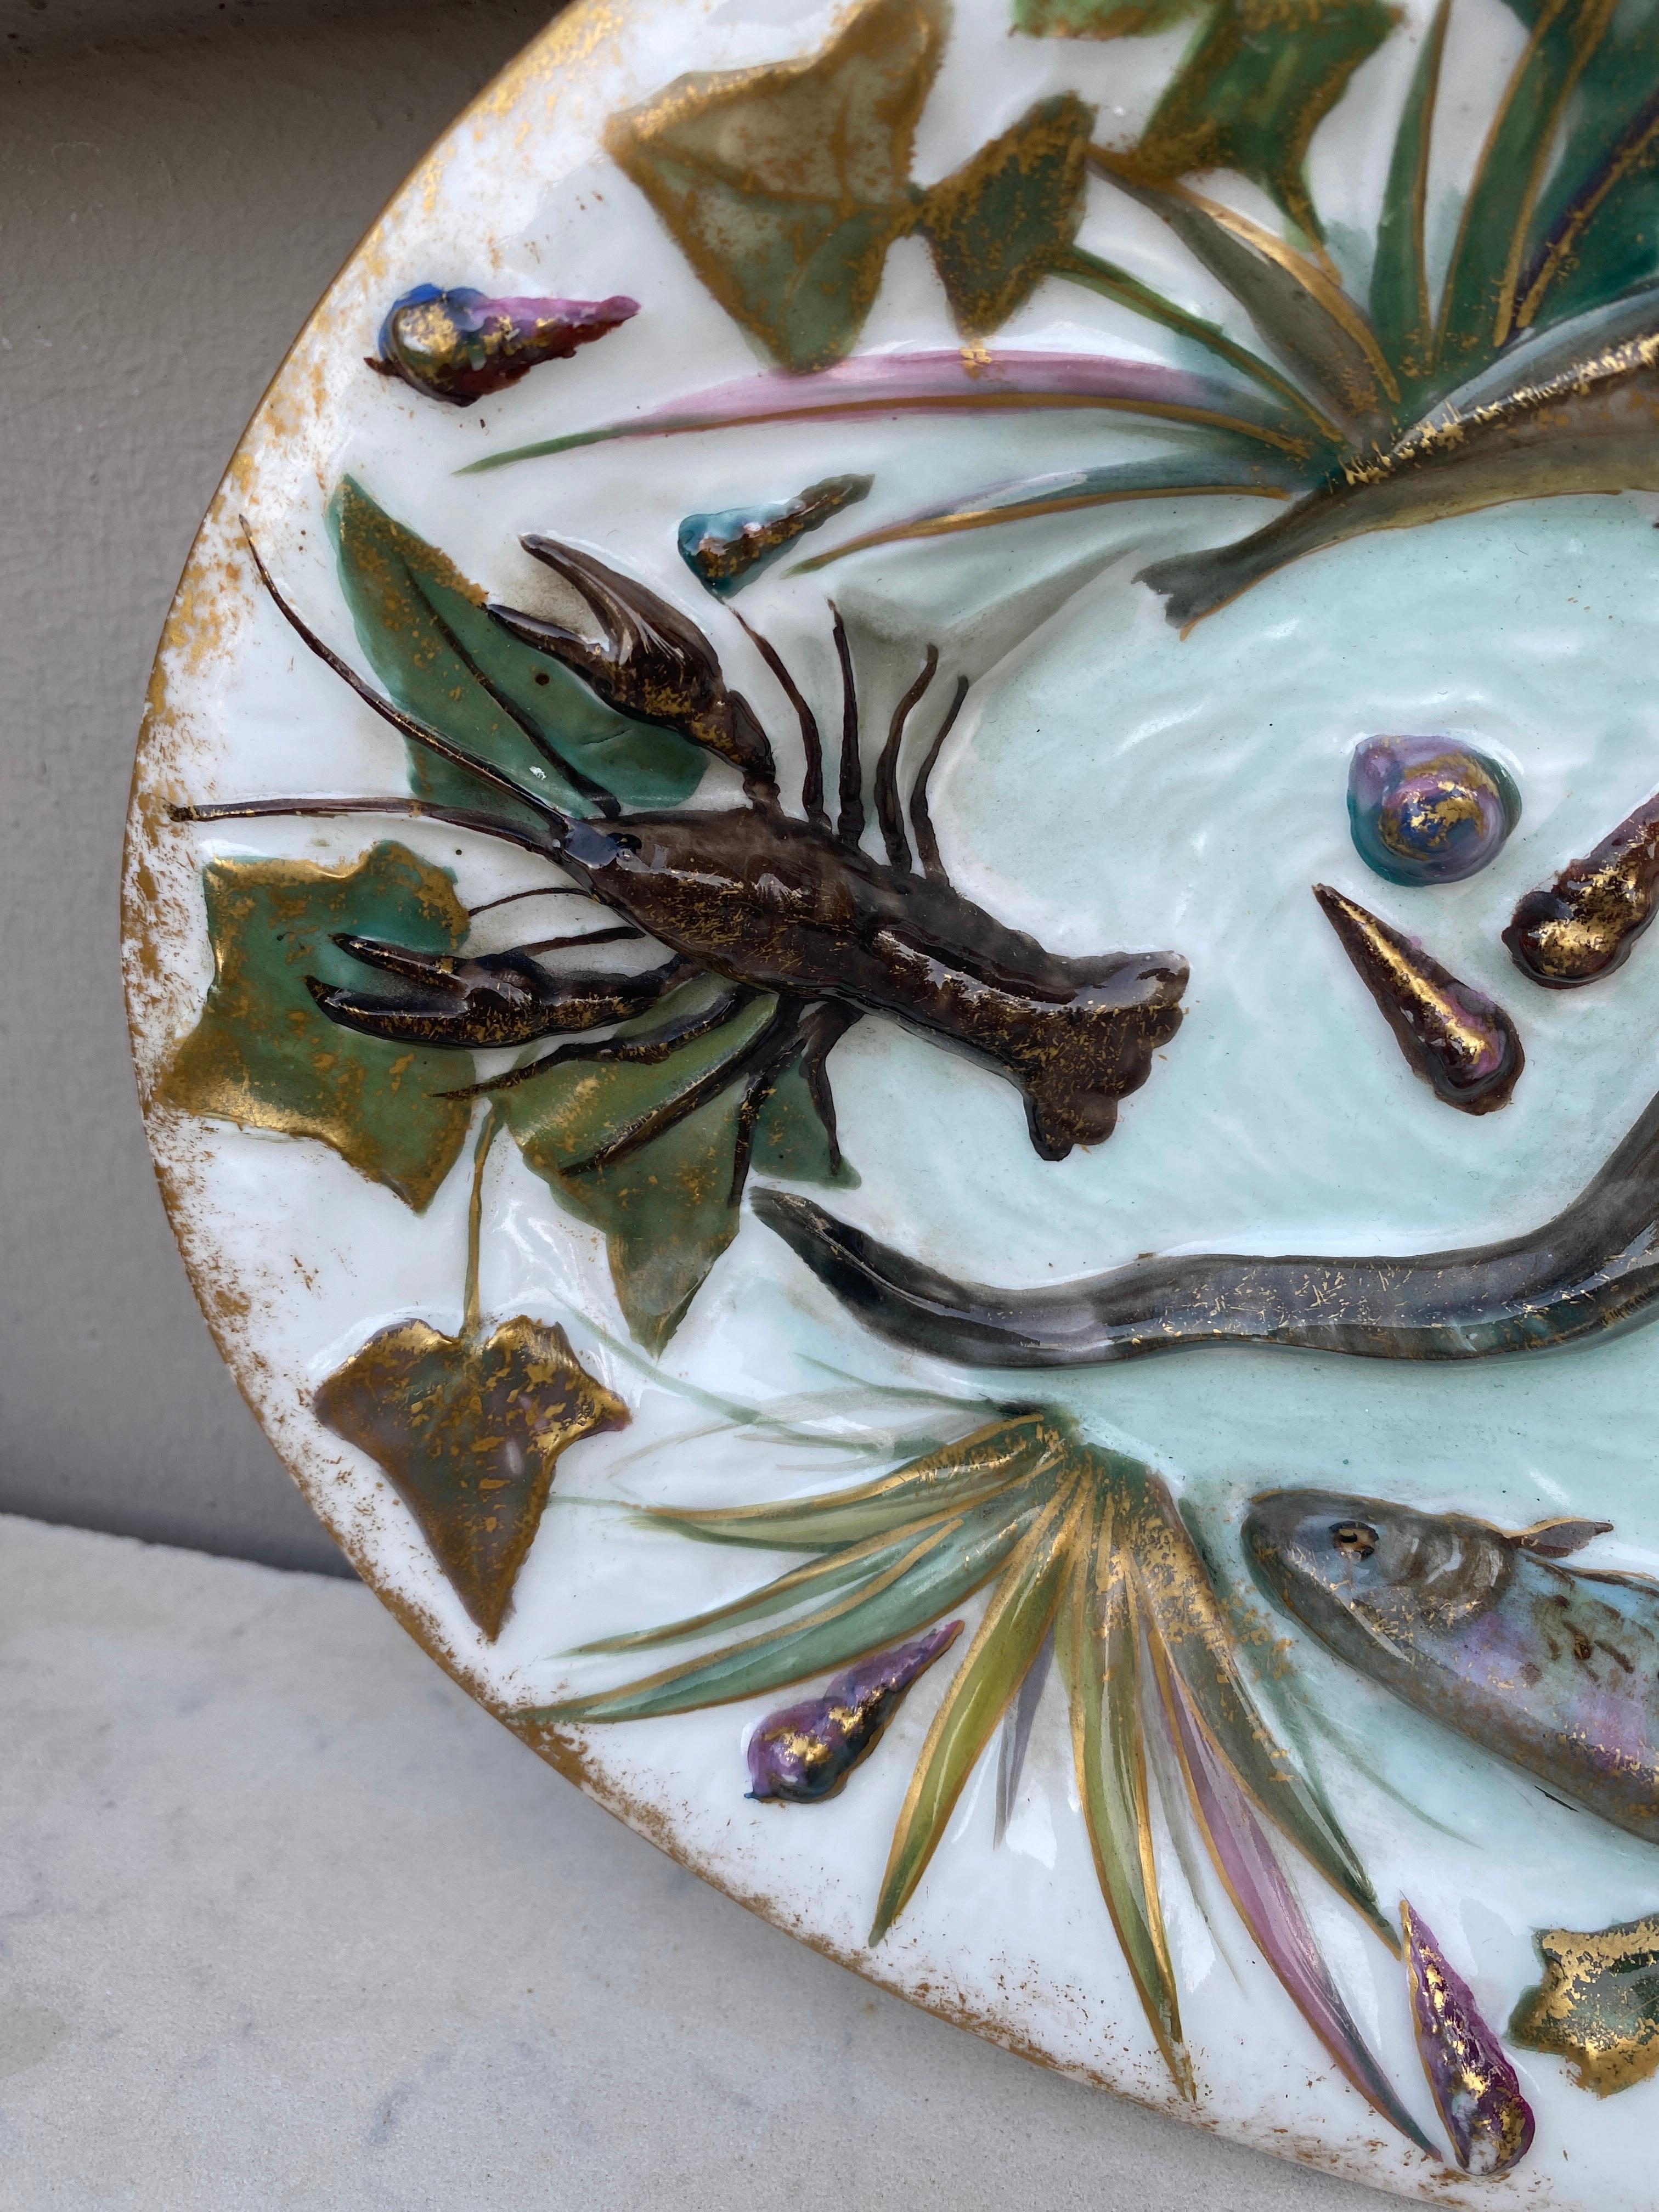 Rare 19th century  porcelain Palissy platter with fishs, eel, shells , crawfish and  ivy leaves.